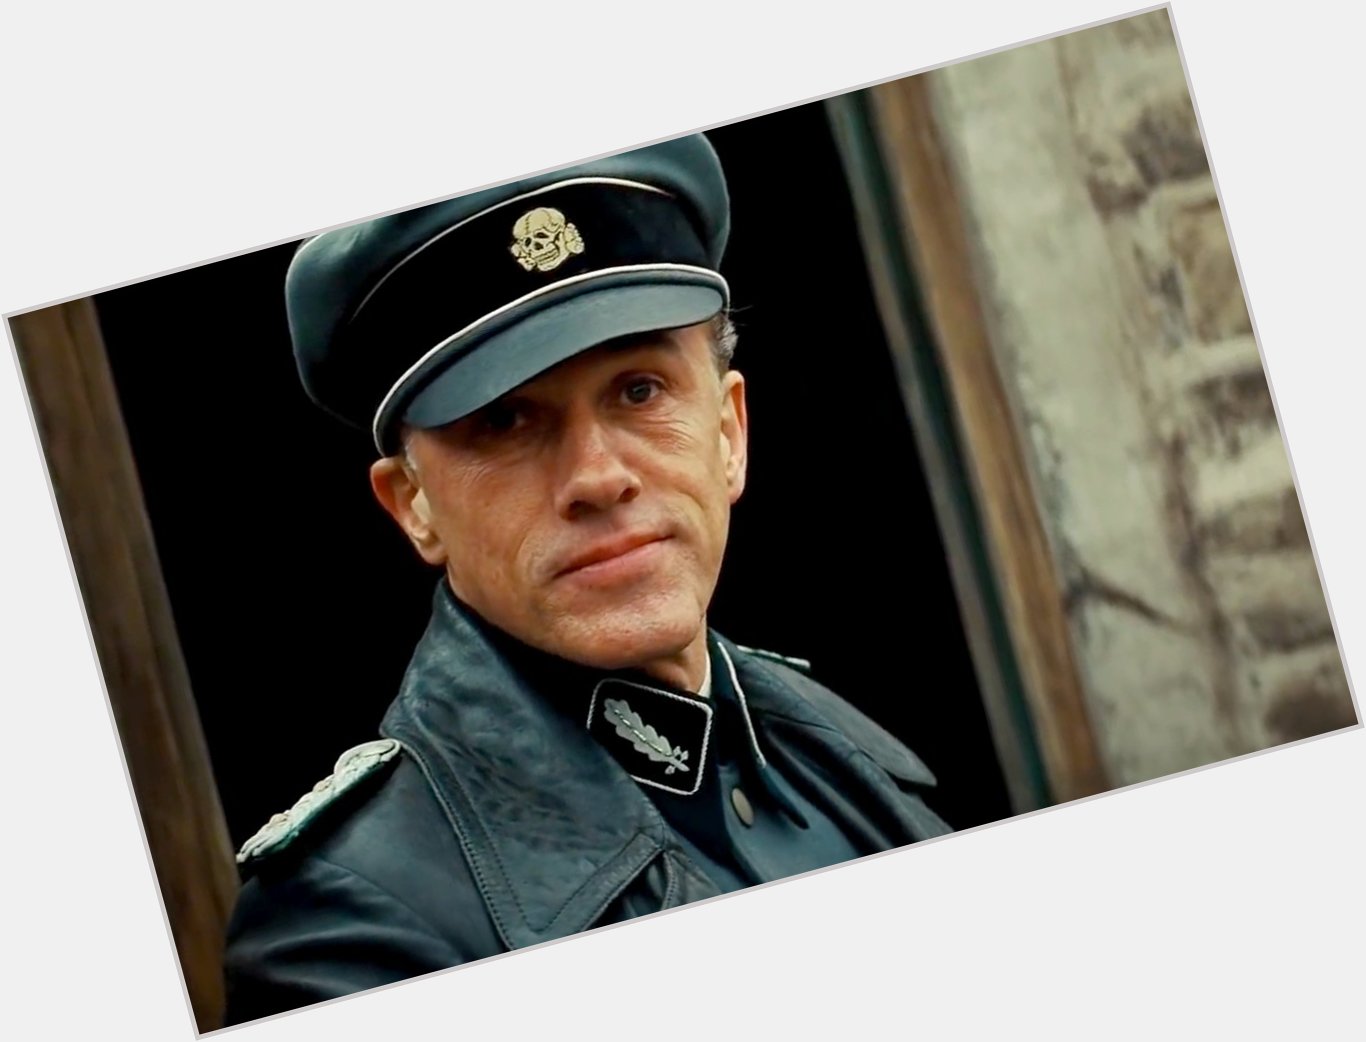 Happy 65th birthday to the amazing Christoph Waltz!

Which is your favorite performance by the actor? 